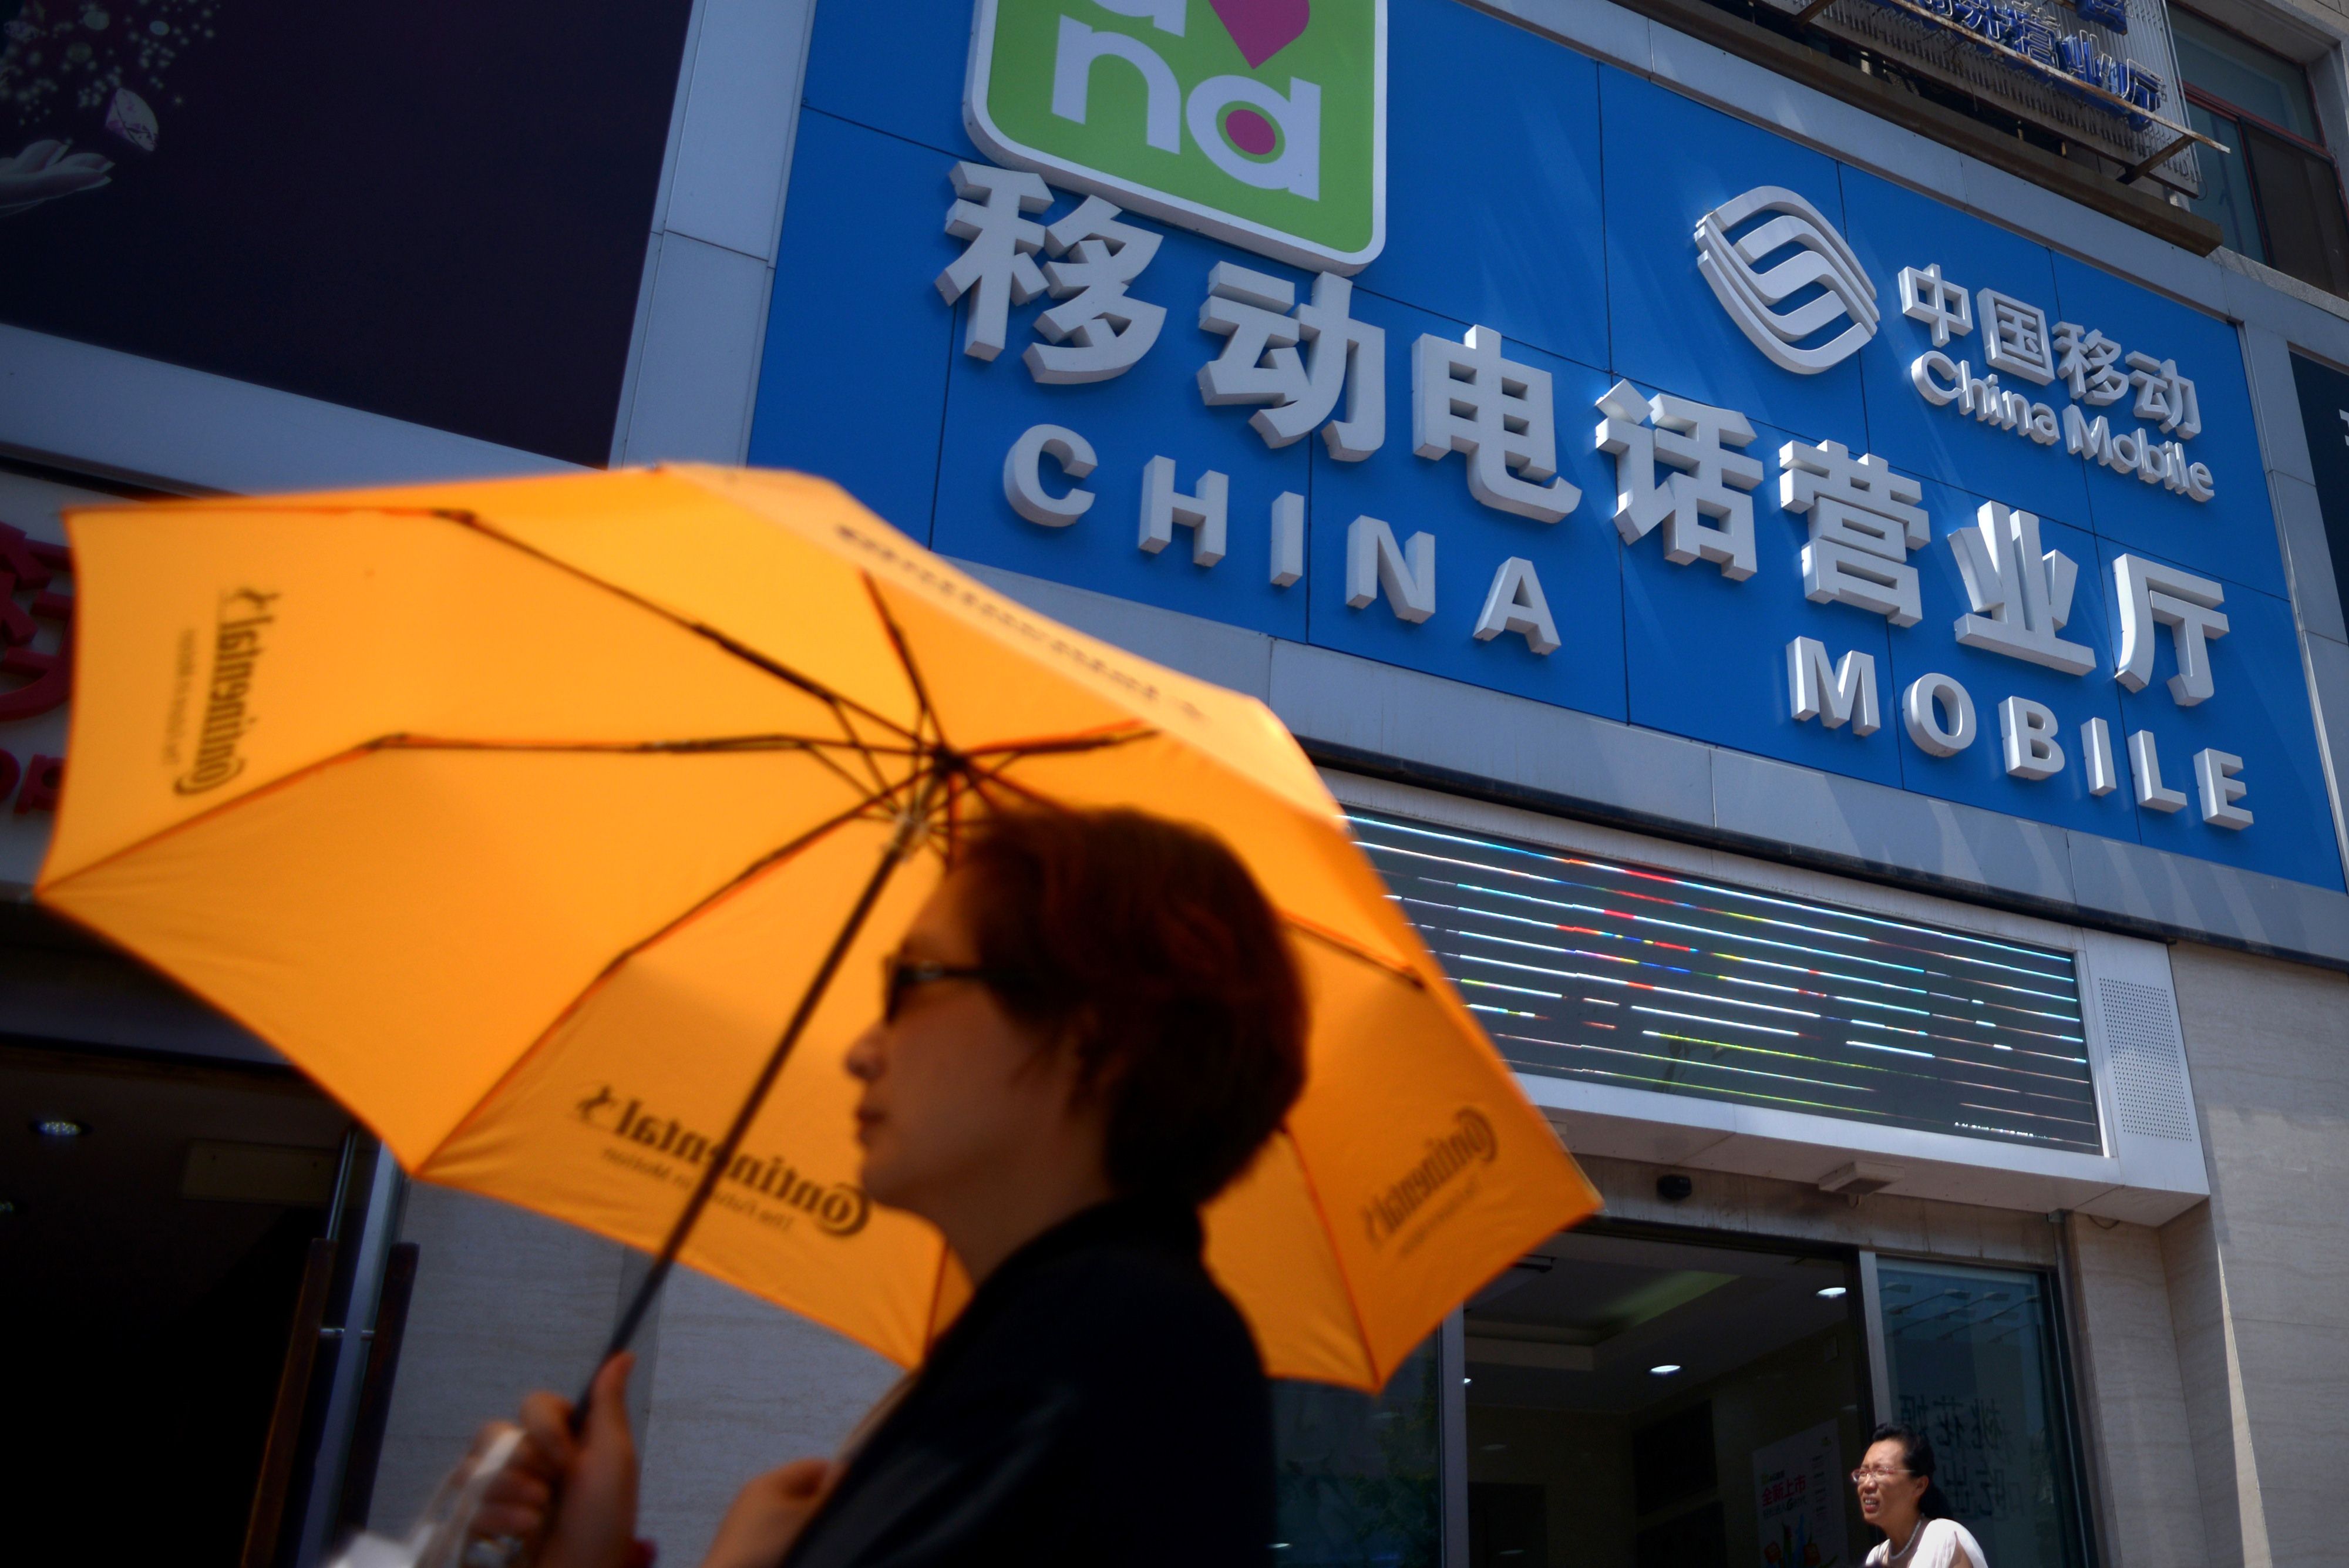 China Mobile, China Unicom and China Telecom have yet to increase their internet speeds and lower fees as premier Li Keqiang has urged. Photo: AFP